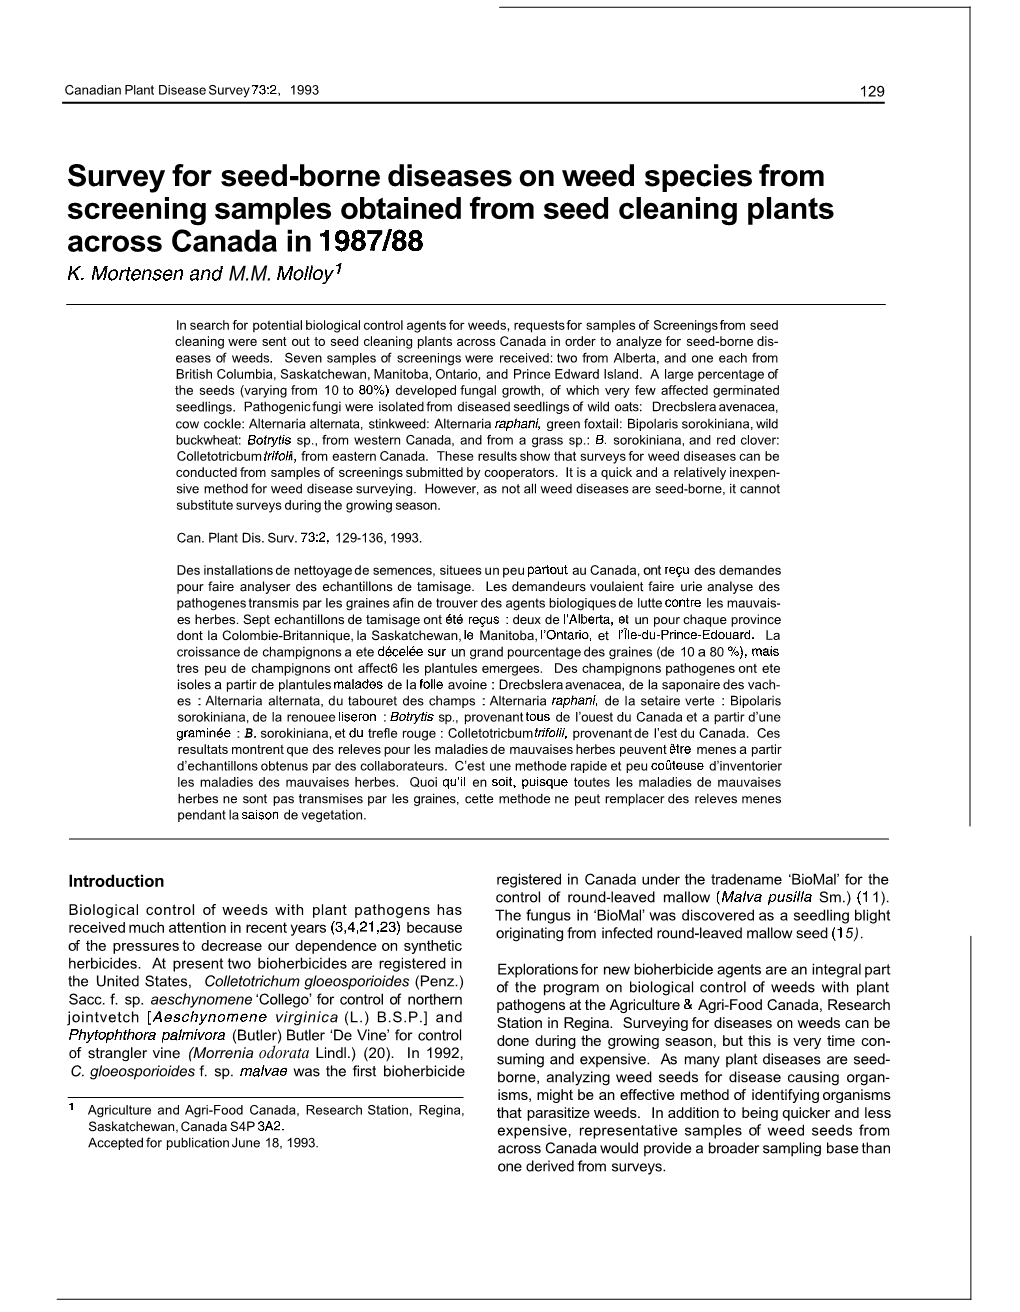 Survey for Seed-Borne Diseases on Weed Species from Screening Samples Obtained from Seed Cleaning Plants Across Canada in 1987188 K